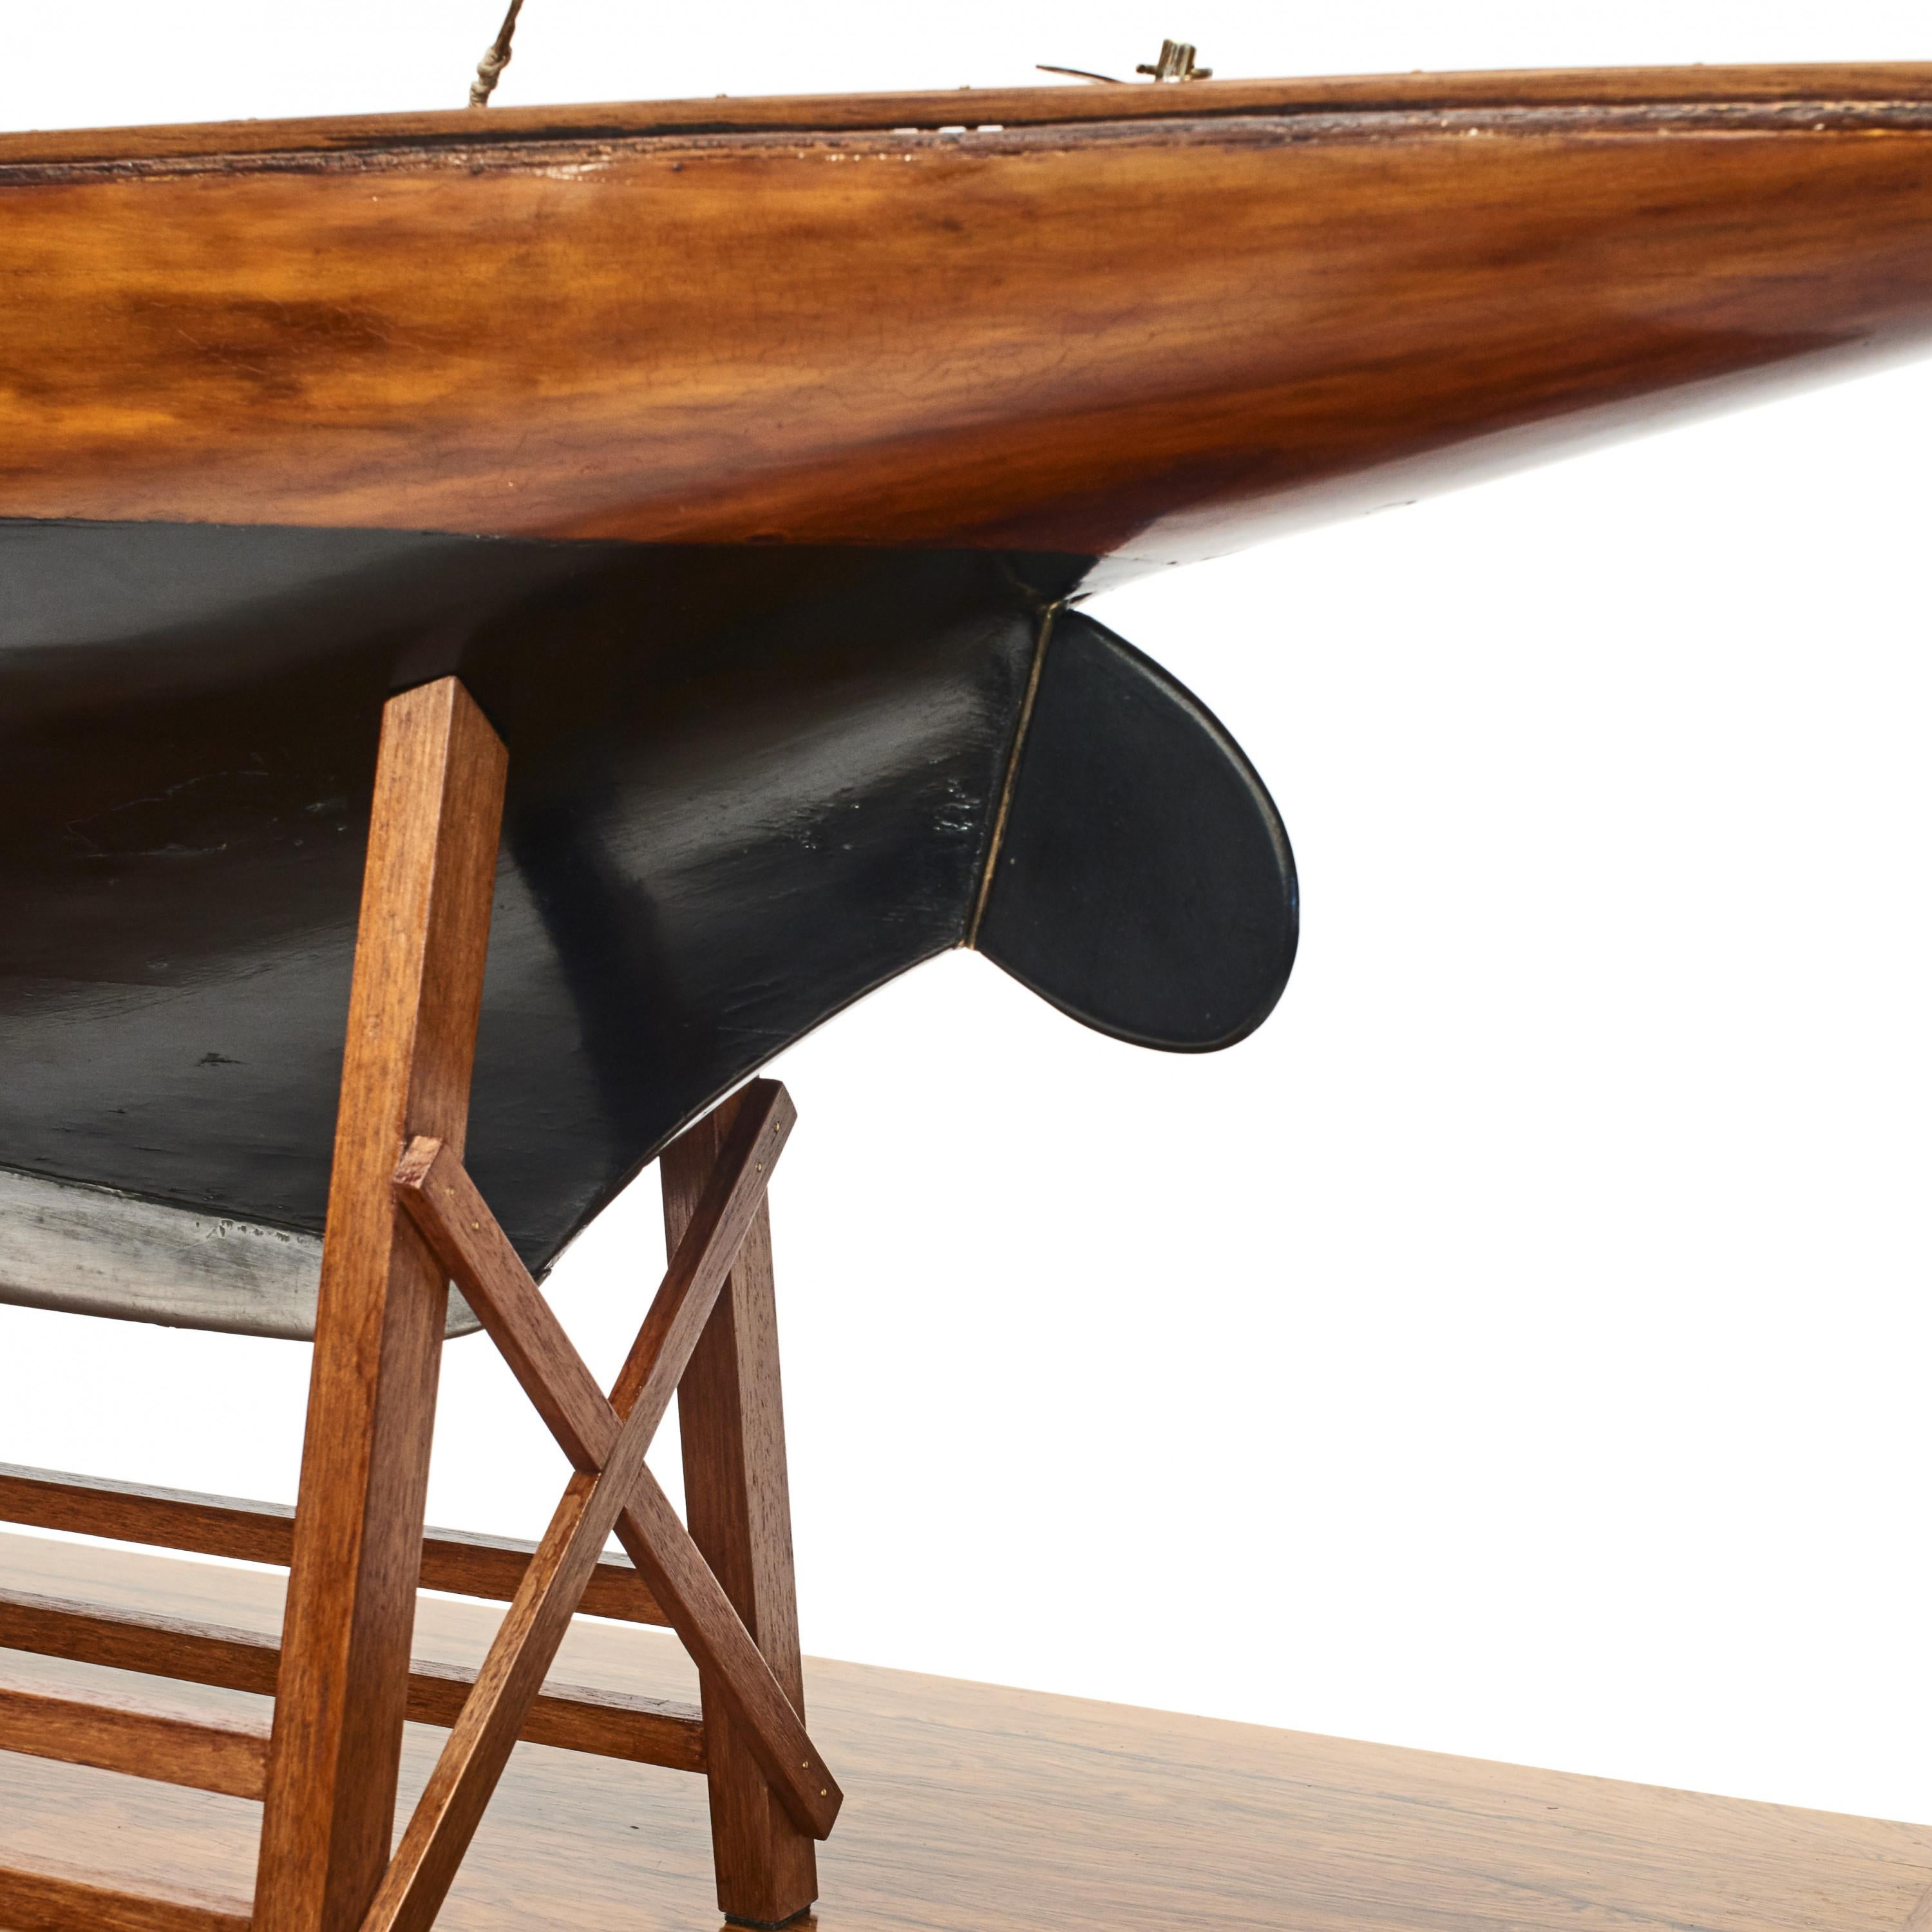 20th Century Large Hand-Built Model of Wooden Pond Yacht